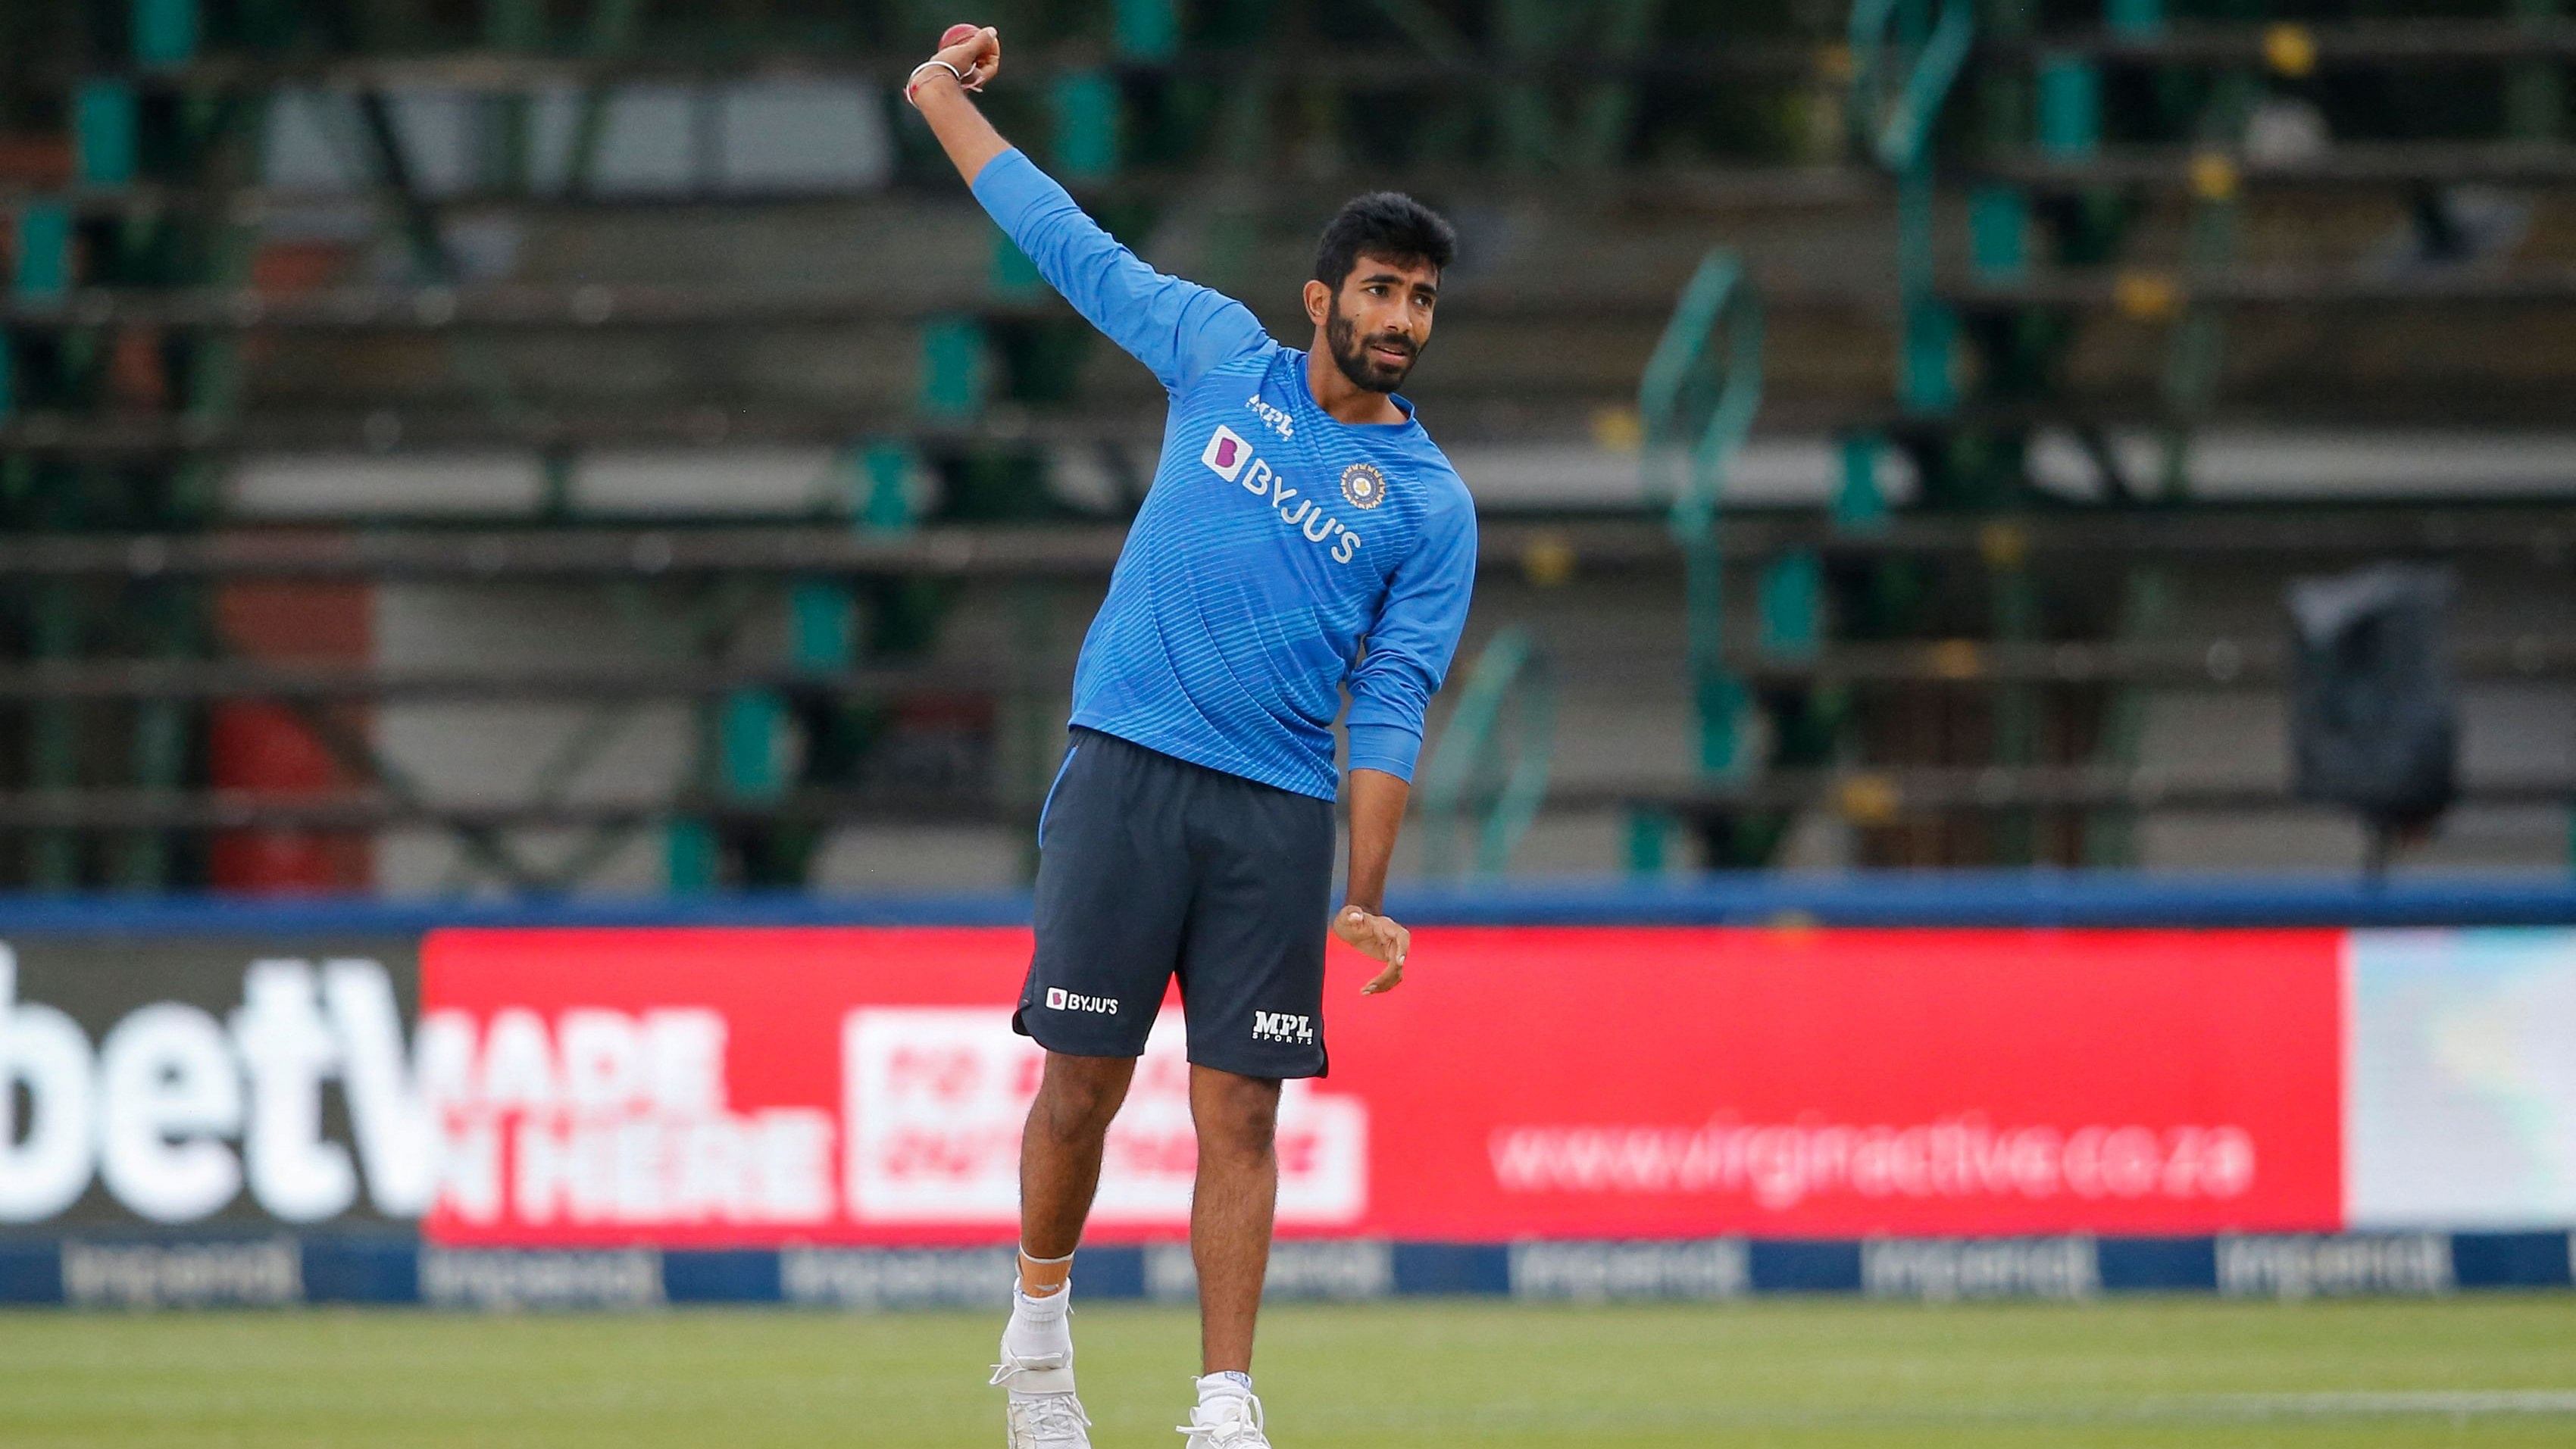 Jasprit Bumrah, who made his debut at Newlands in 2018, will be keen to make an impact in the series-decider between India and South Africa. Credit: AFP Photo